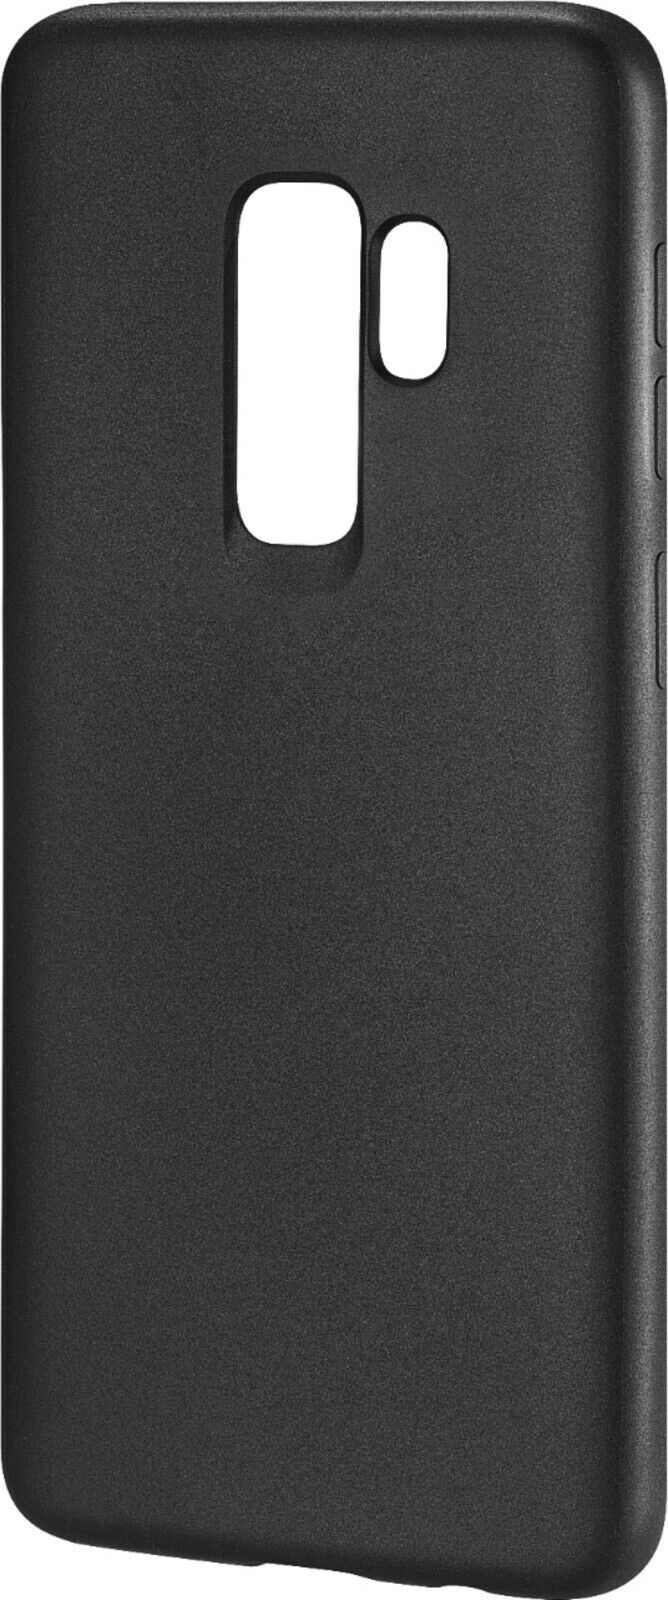 Primary image for NEW Insignia BLACK Soft-Shell Case for Samsung Galaxy S9+ Smartphone